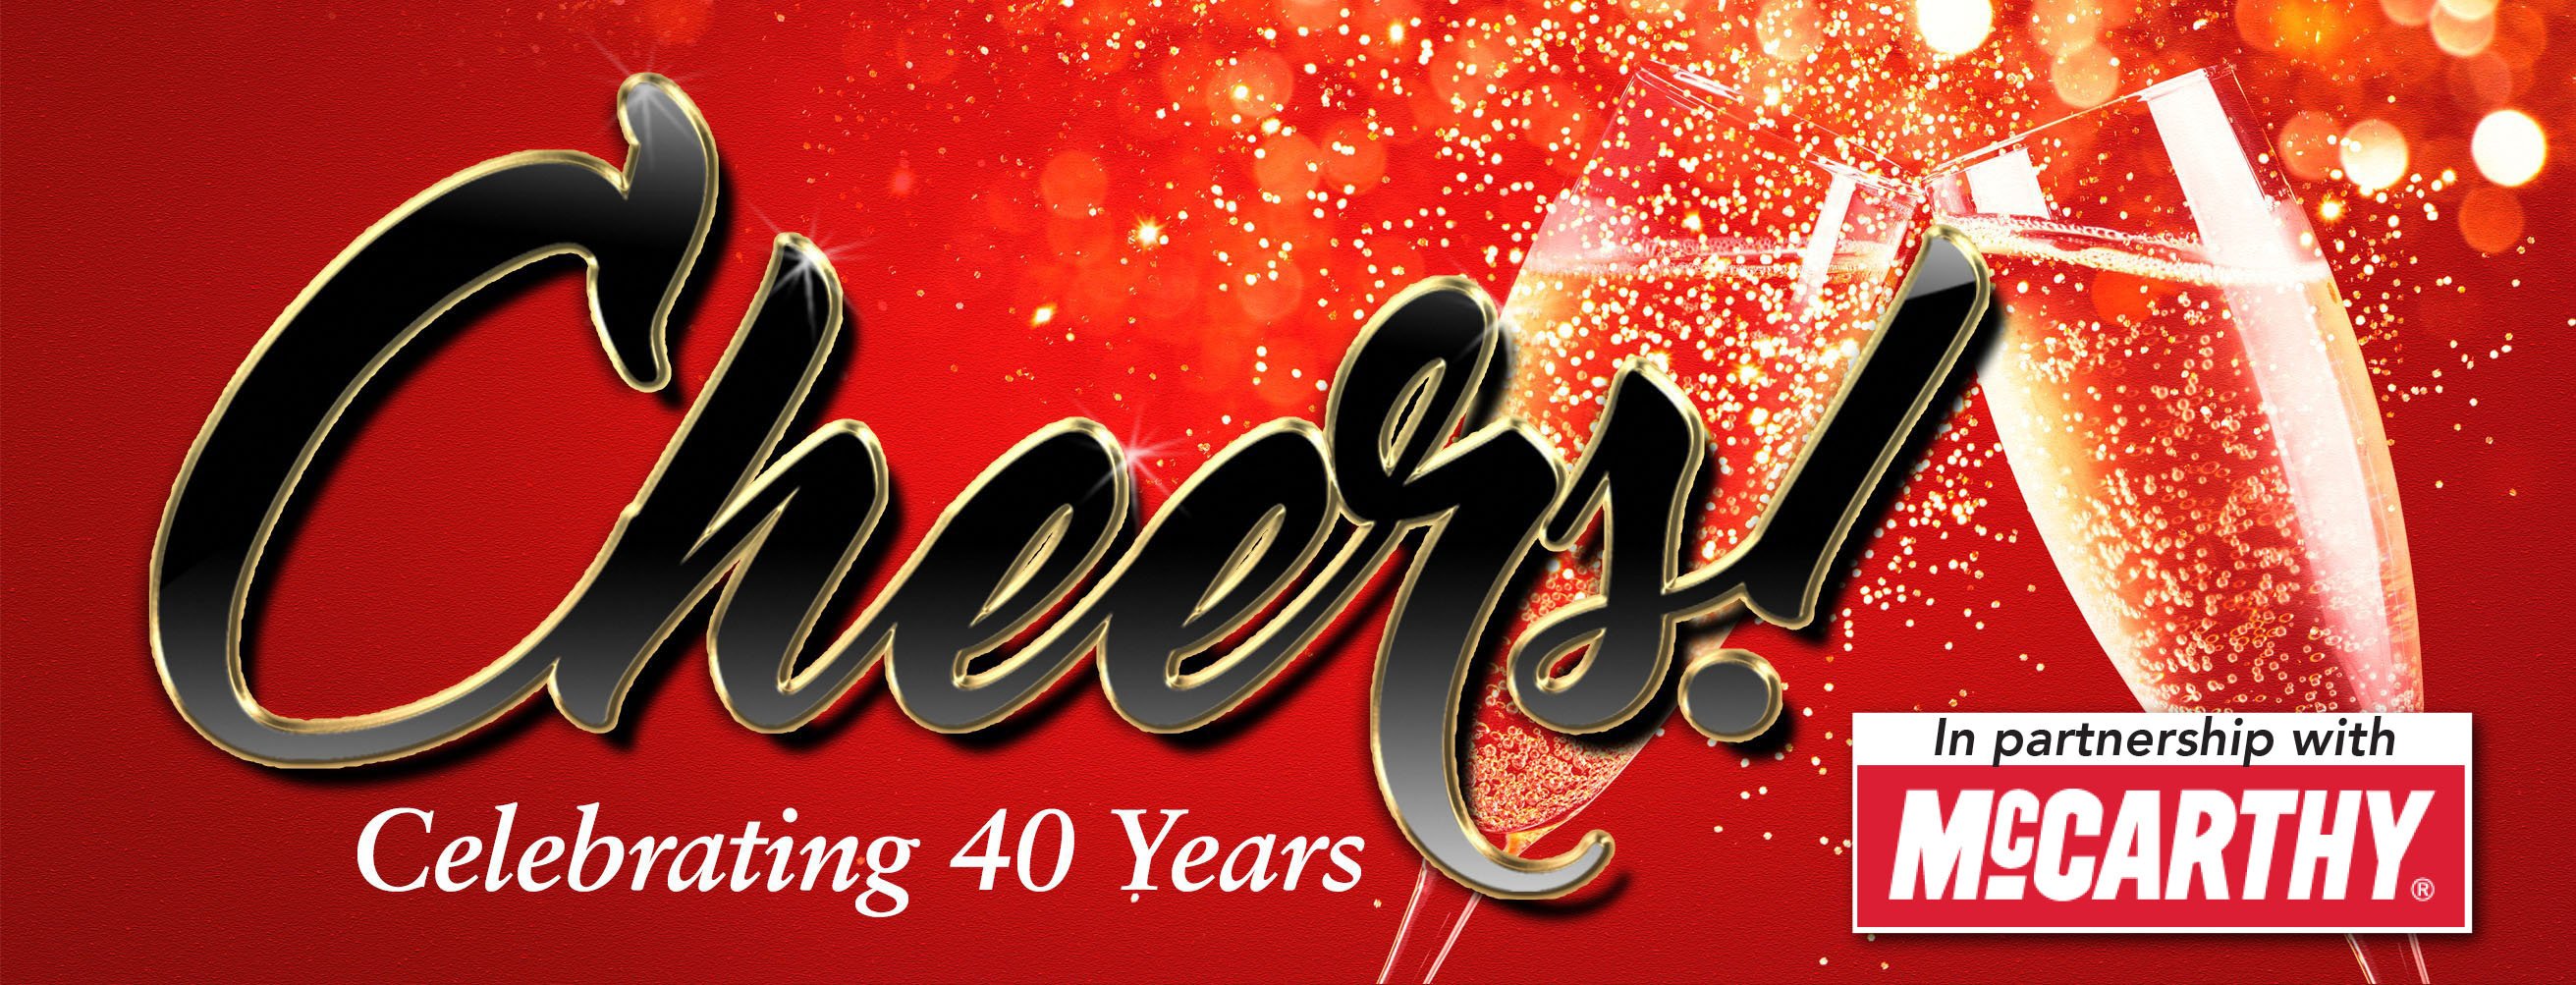 40th Annual Cheers!